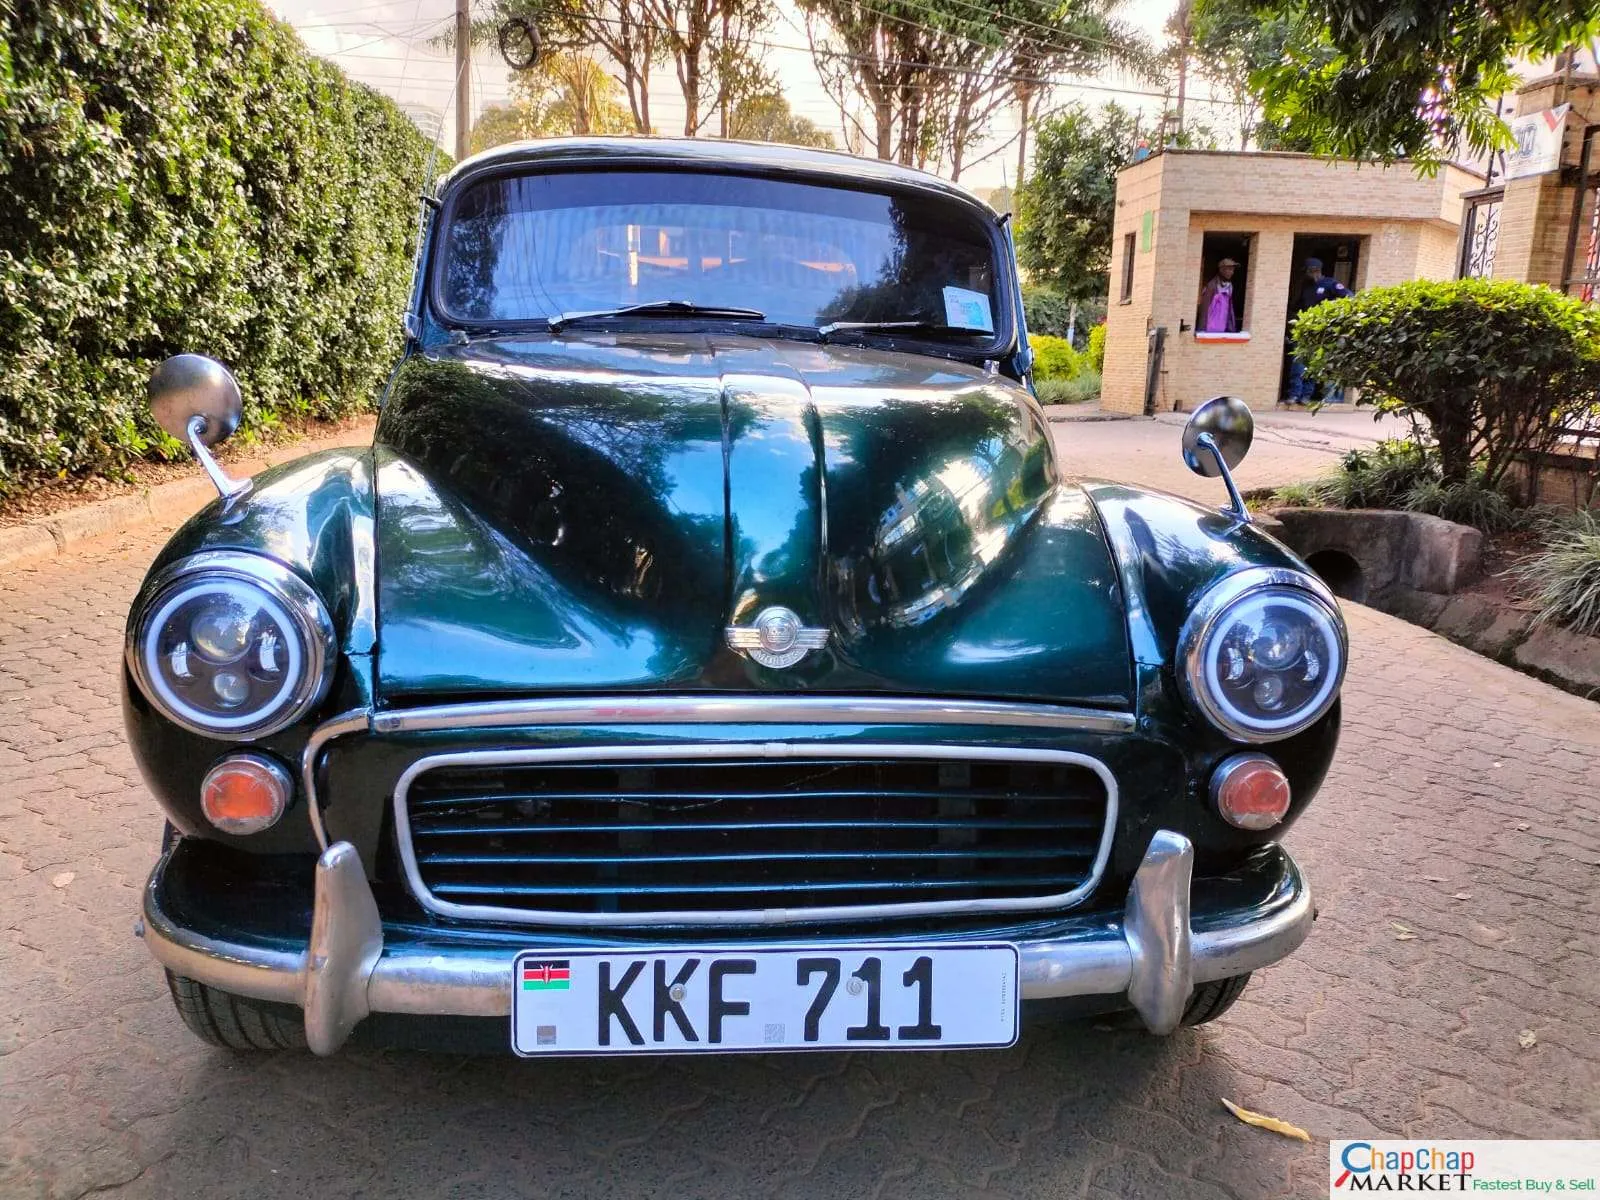 Perfect Condition vintage Classic car Morris Minor for sale Quick sale in Kenya Nairobi